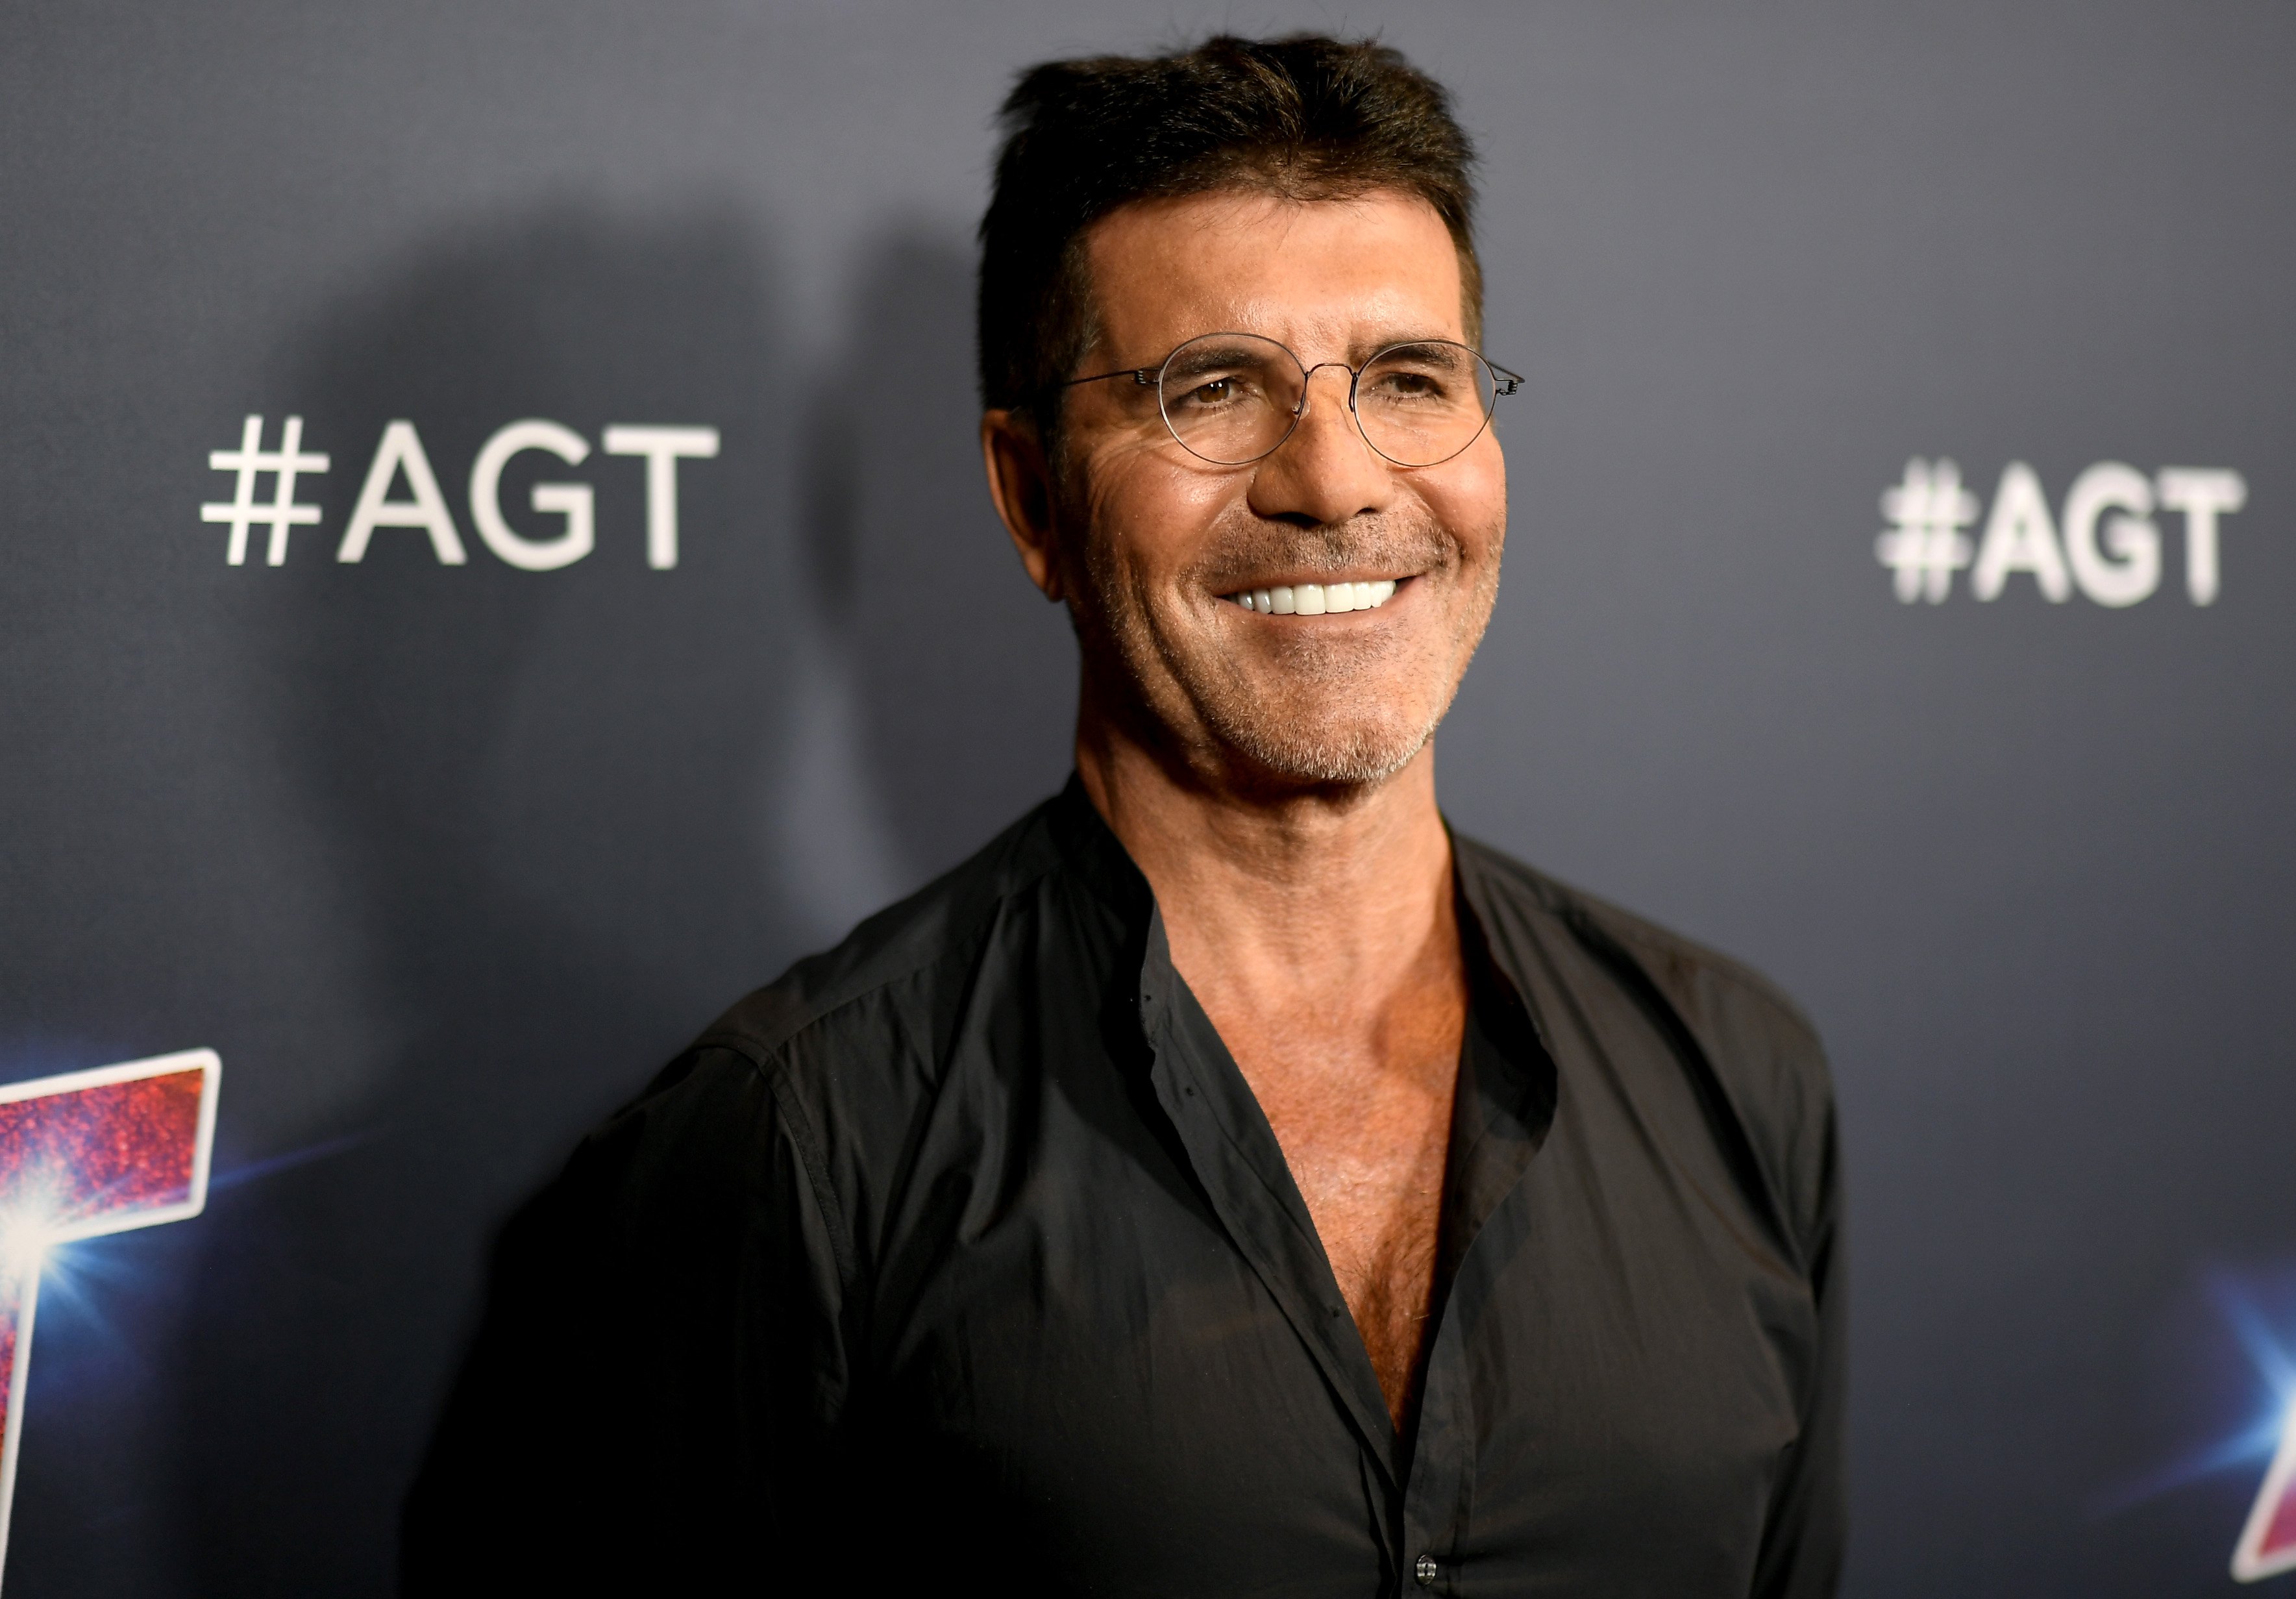 Simon Cowell attends the live show for season 14 of "America's Got Talent" in Hollywood, California on September 17, 2019 | Photo: Getty Images